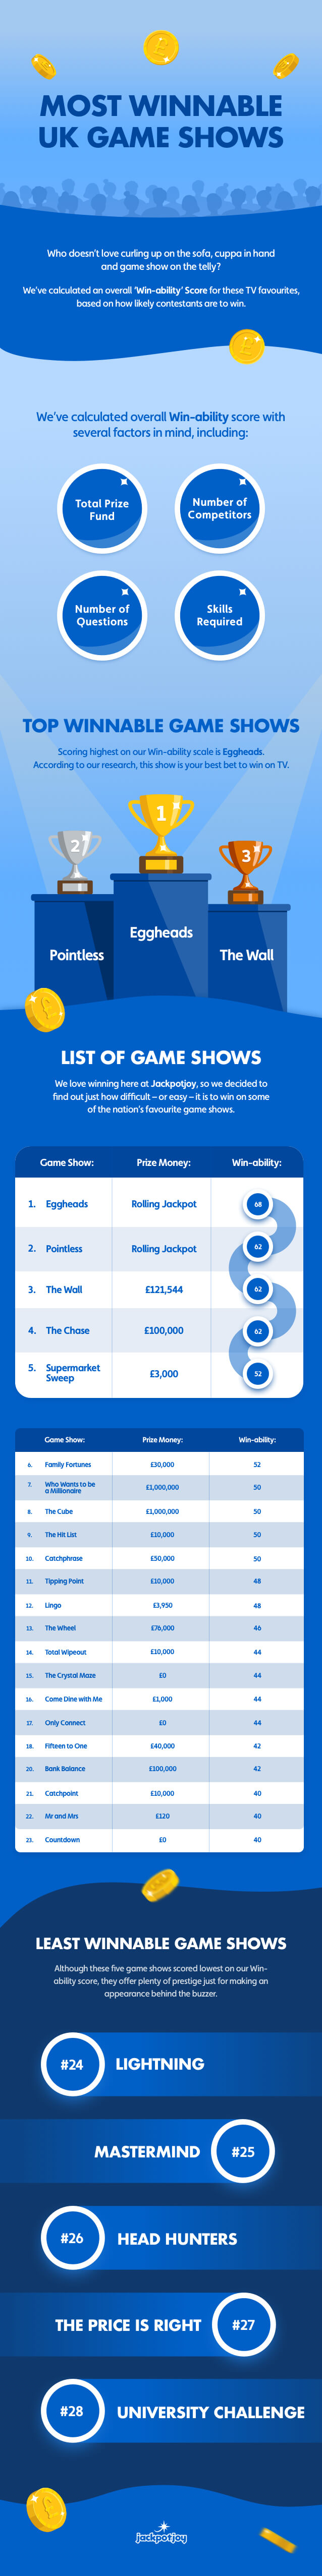 Most Winnable UK Game Shows Revealed - Fancy your chances of winning a TV game show? Jackpotjoy reveals which UK programmes offer the best bang for their buck, according to their Win-ability score